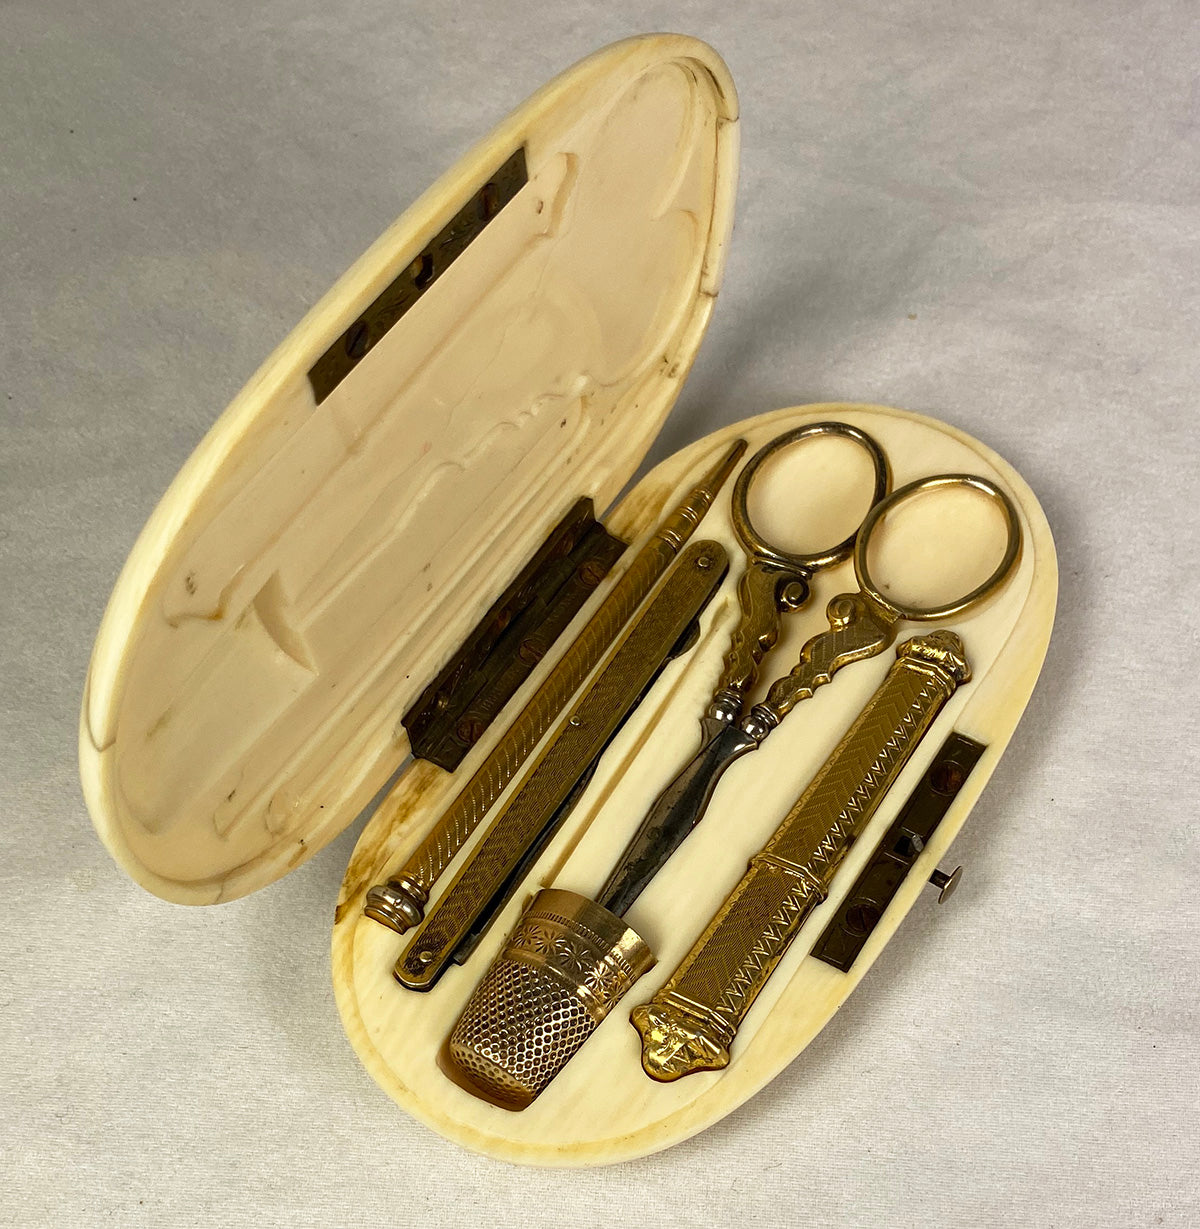 Antique French Sewing Etui, Ivory Case, .800/1000 Silver 18k Gold Vermeil Tools +